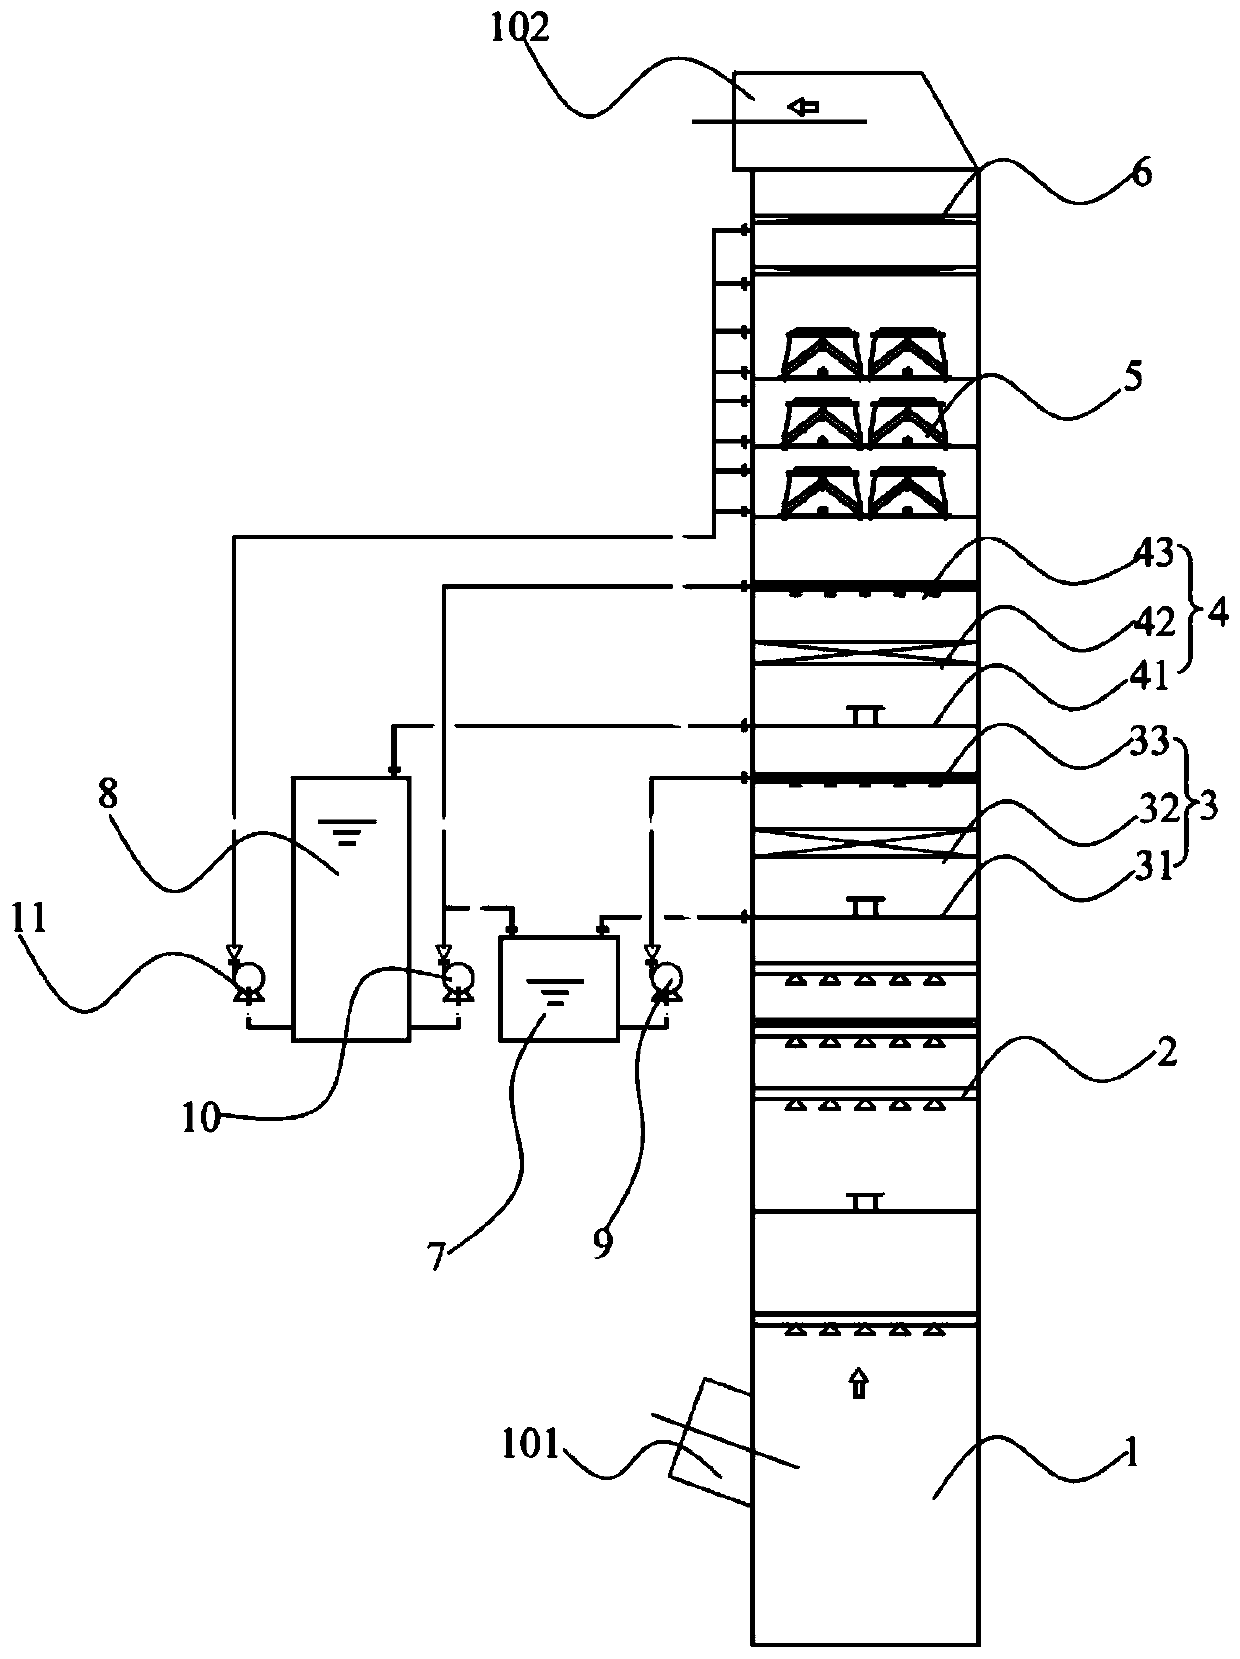 Desulfurization and dust removal device